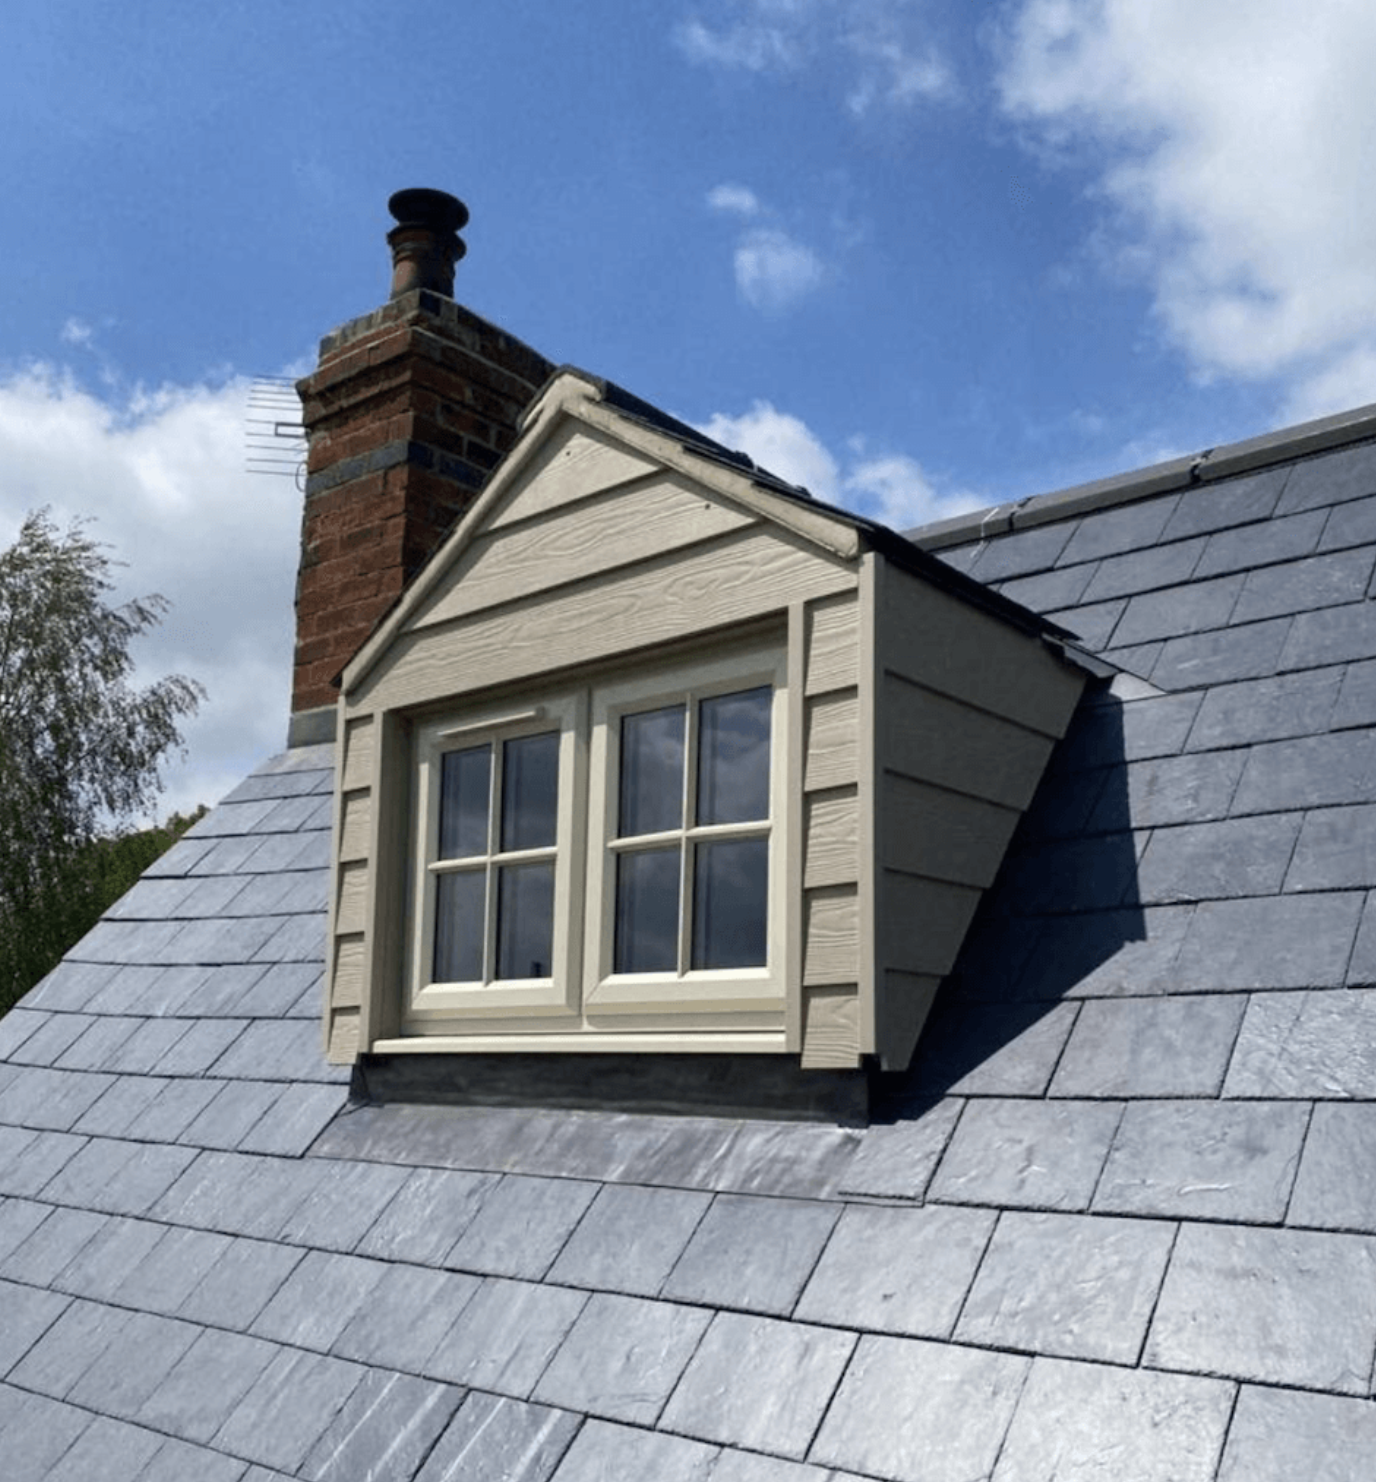 Tiled & Slate Roofing Northampton - LD Roofing Services Ltd